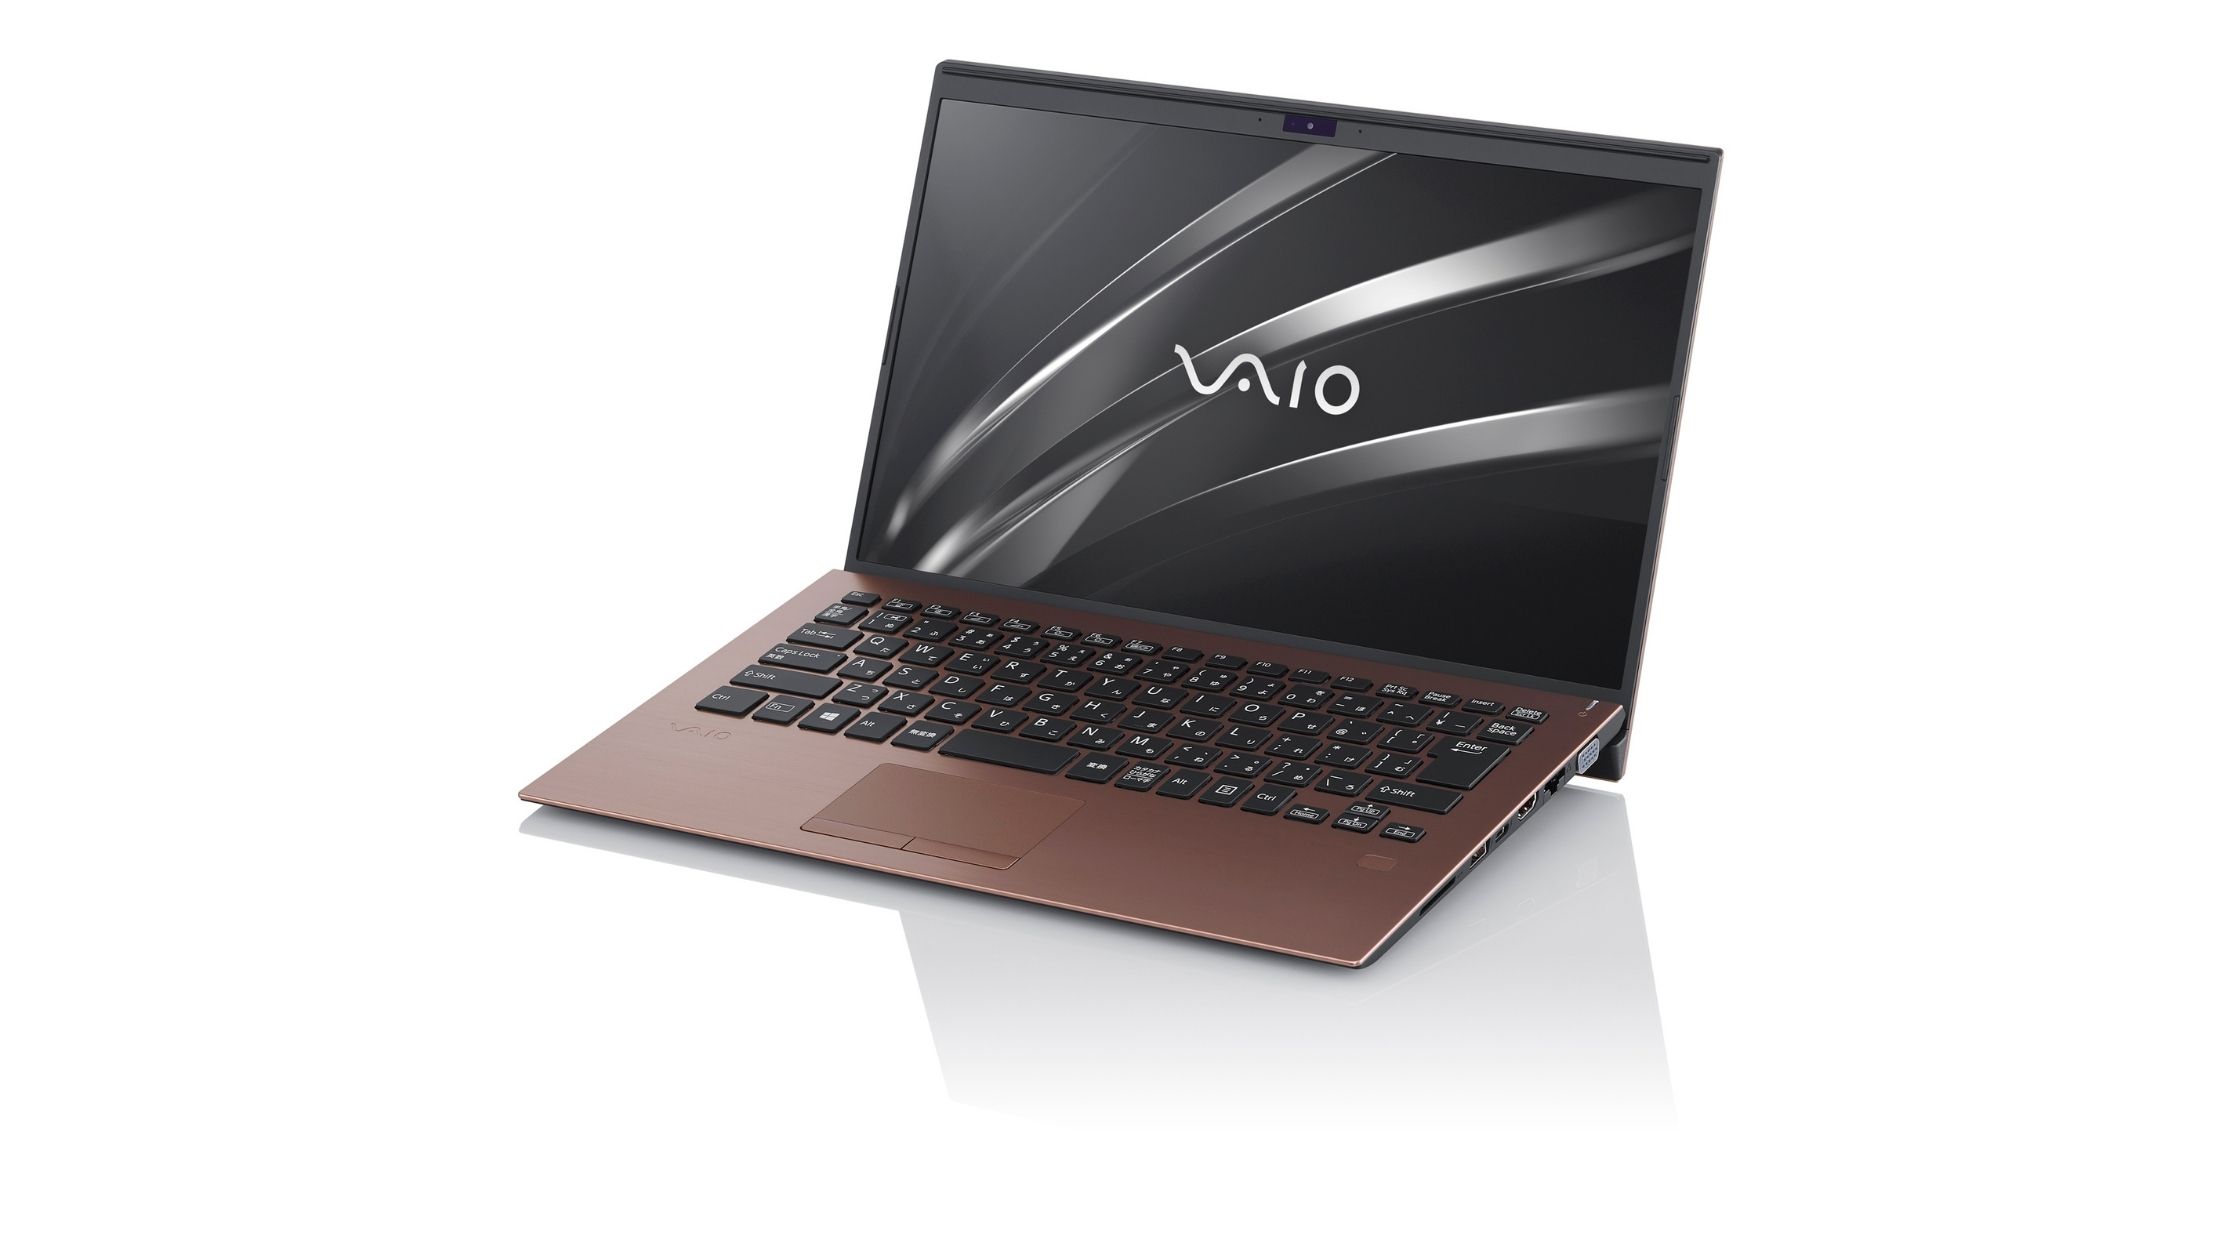 Vaio SE 14 and Vaio SX 14 laptops with 11th gen Intel processors launched in India TechRadar